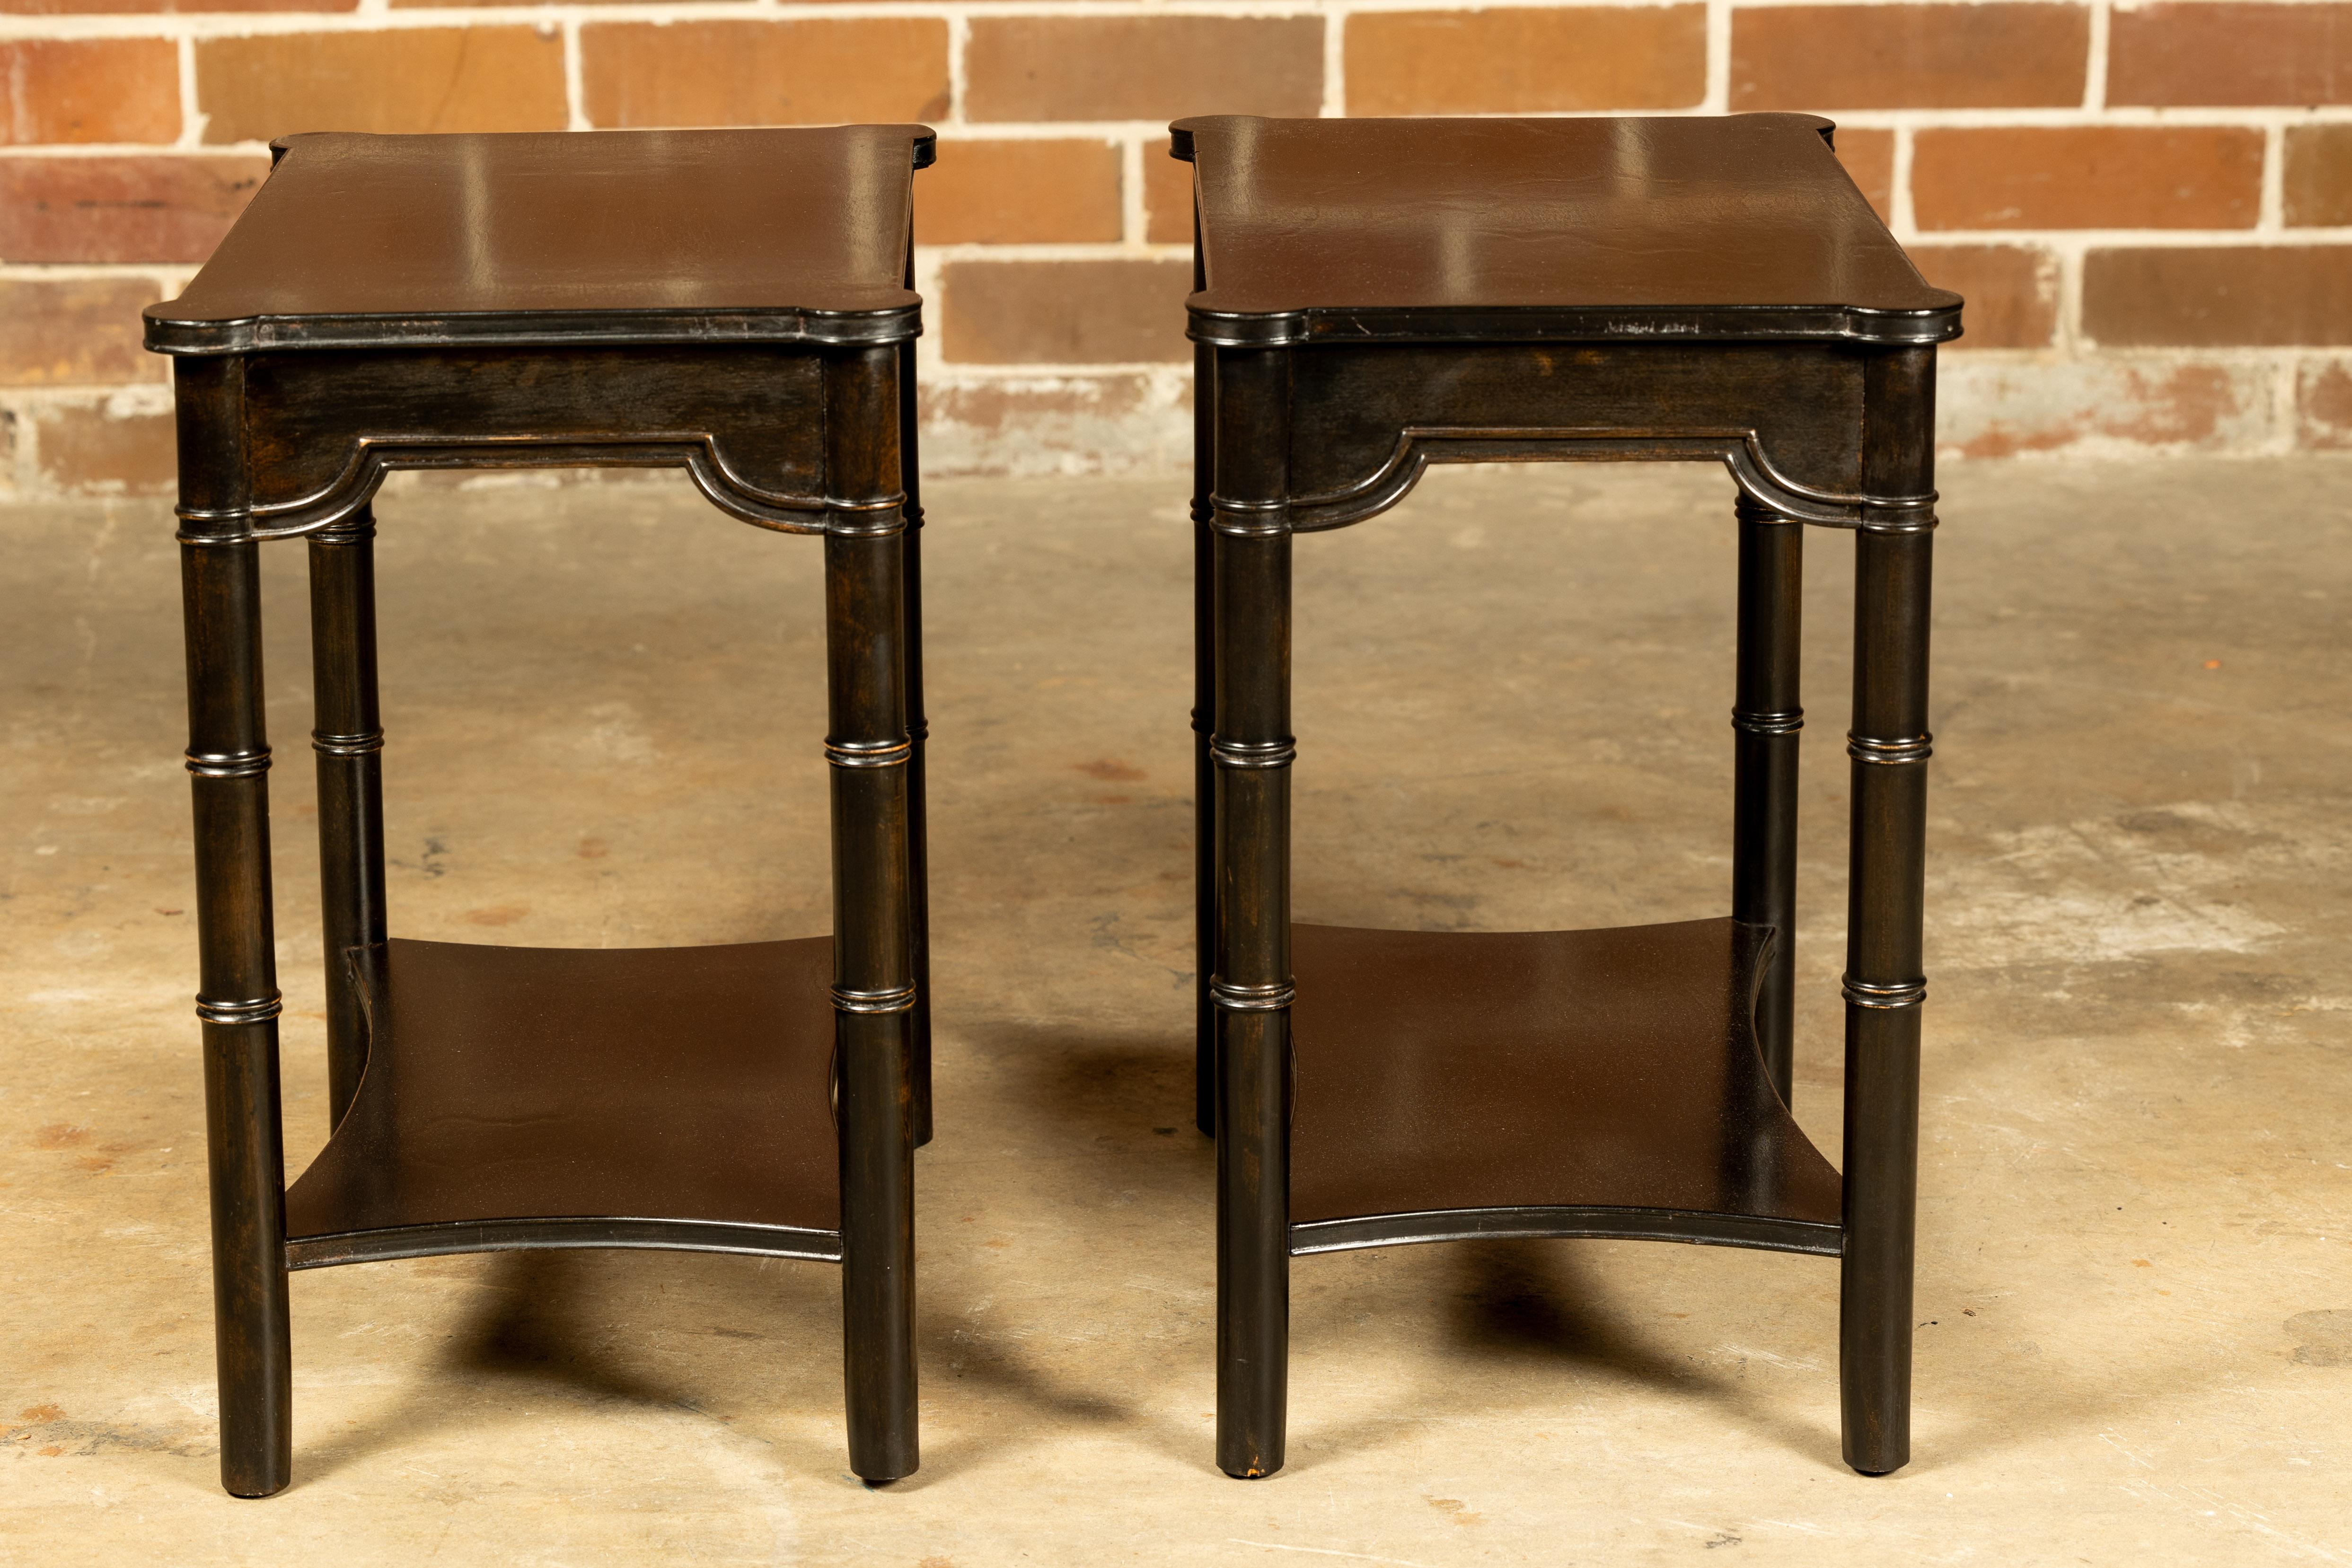 Midcentury English Ebonized Faux Bamboo Side Tables with Carved Aprons, a Pair For Sale 8